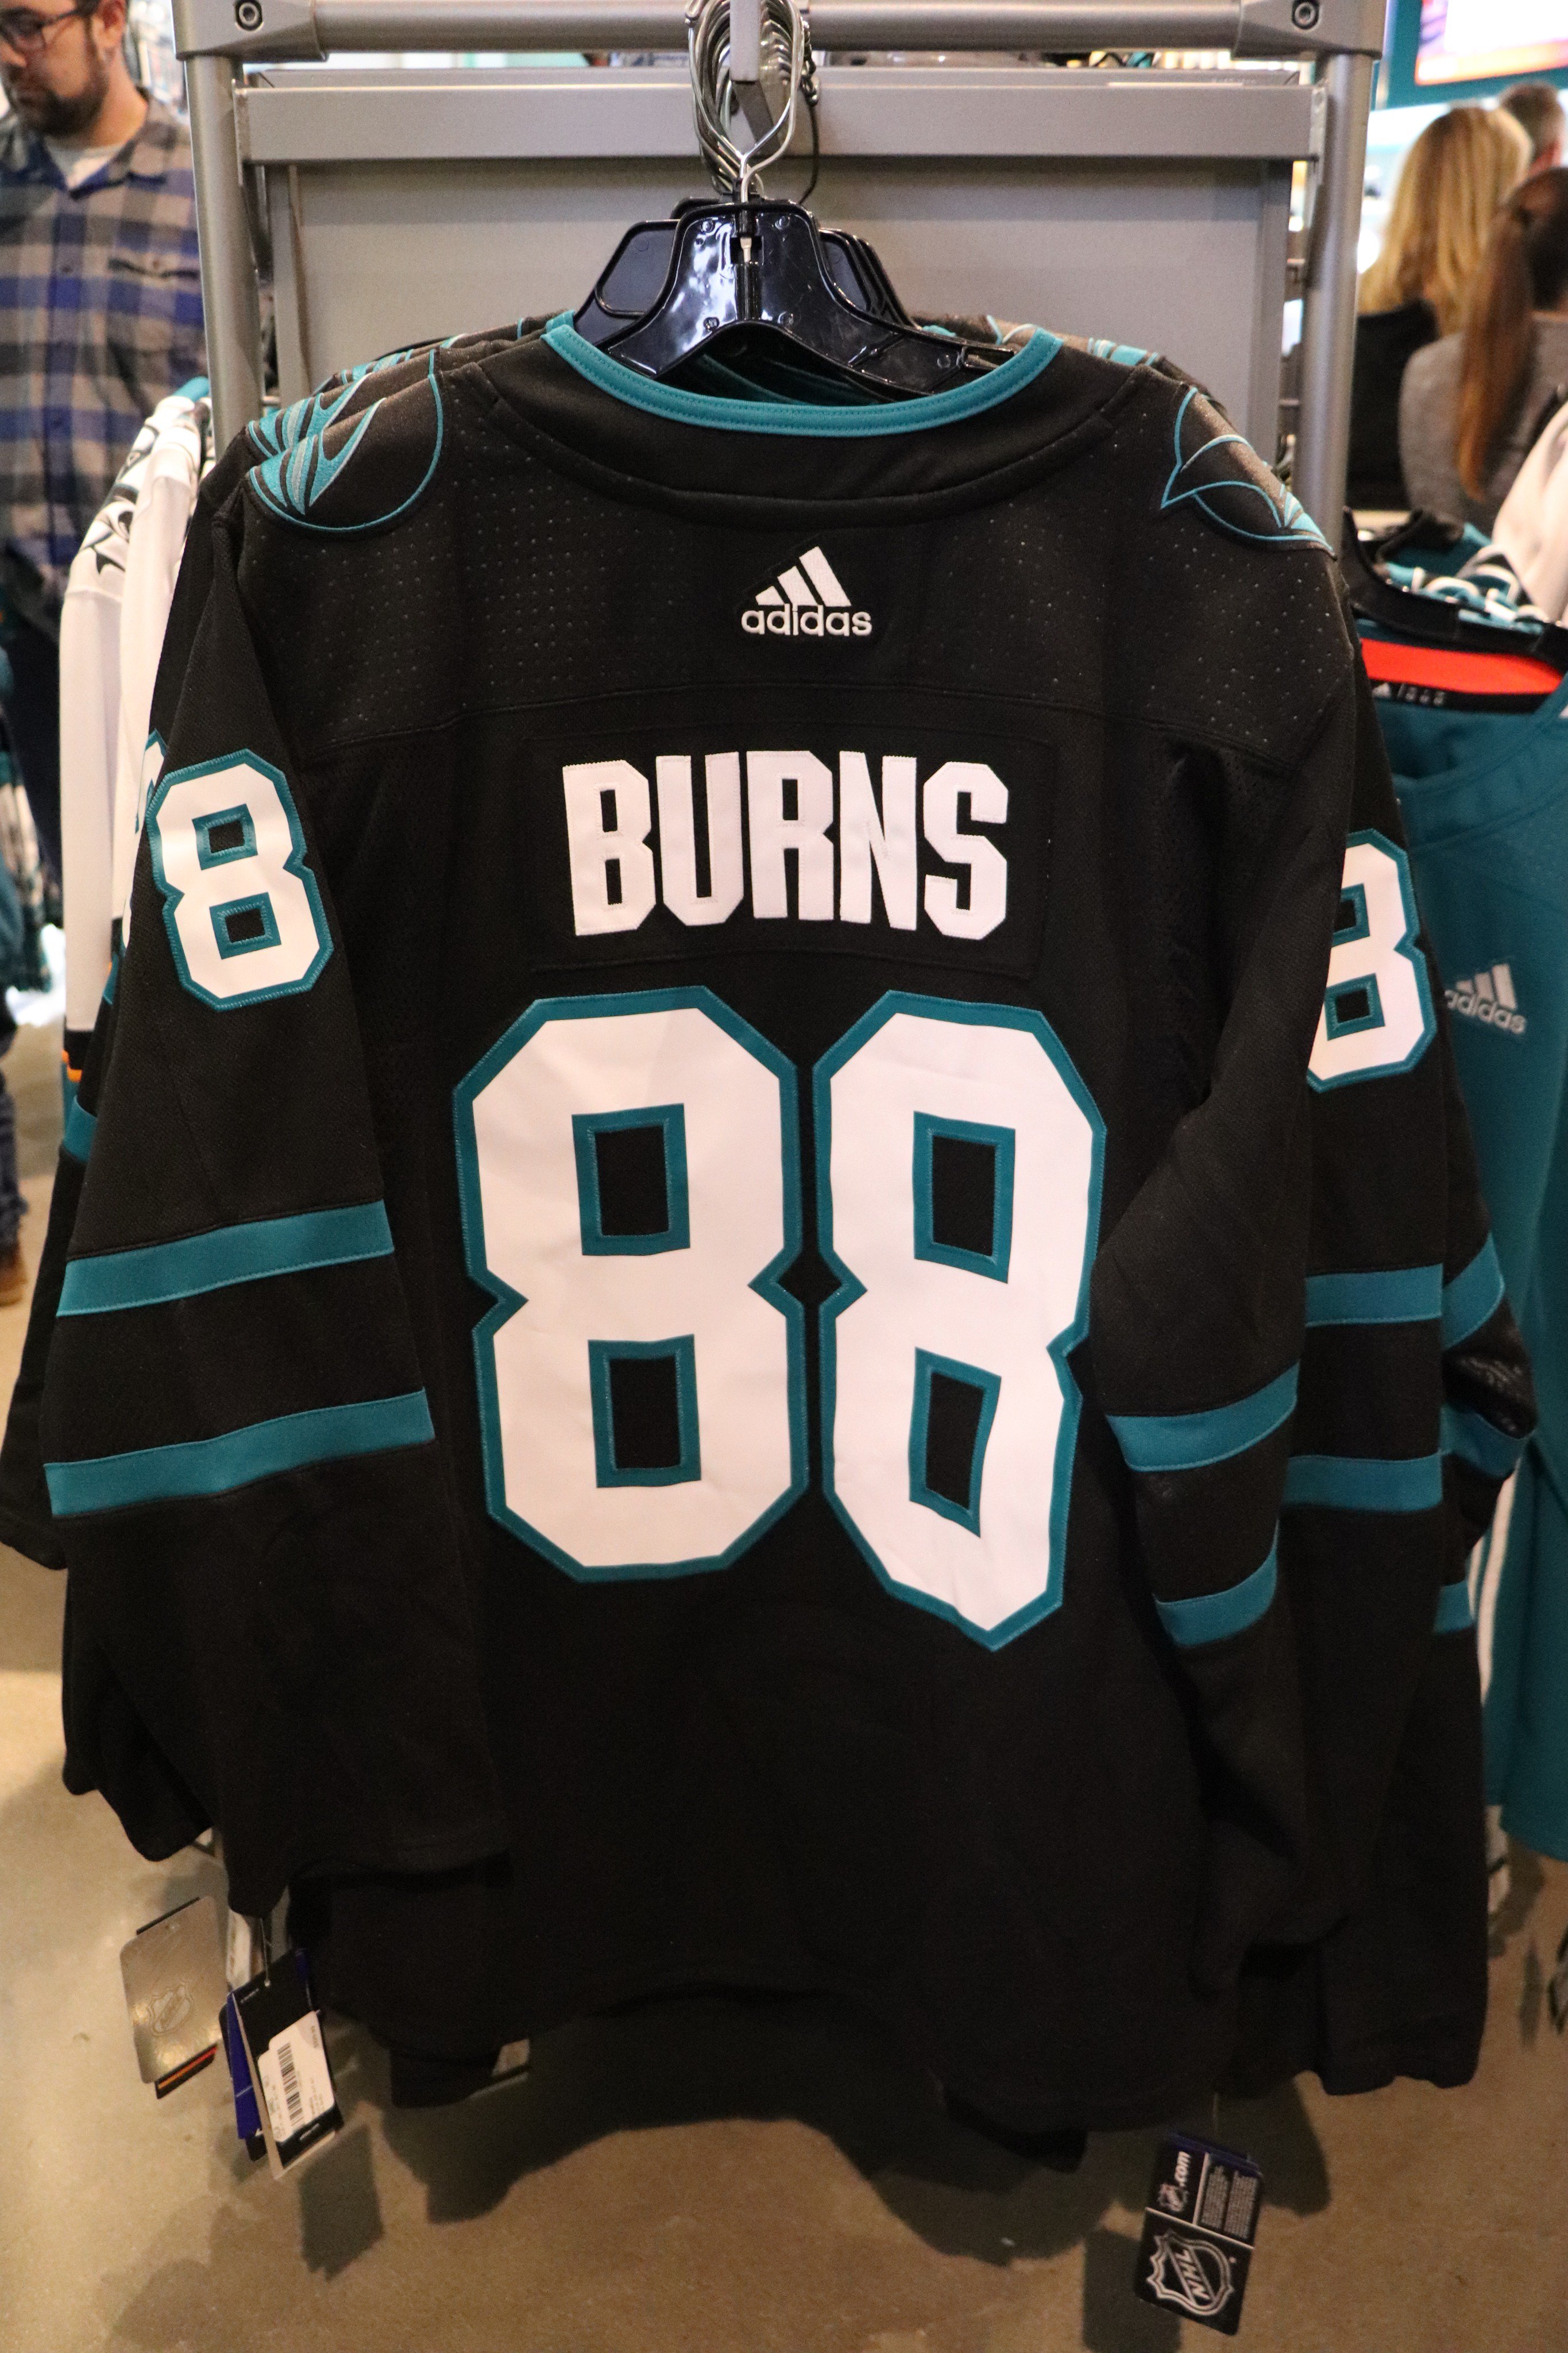 San Jose Sharks on X: Get 'em while they're hot! #StealthMode